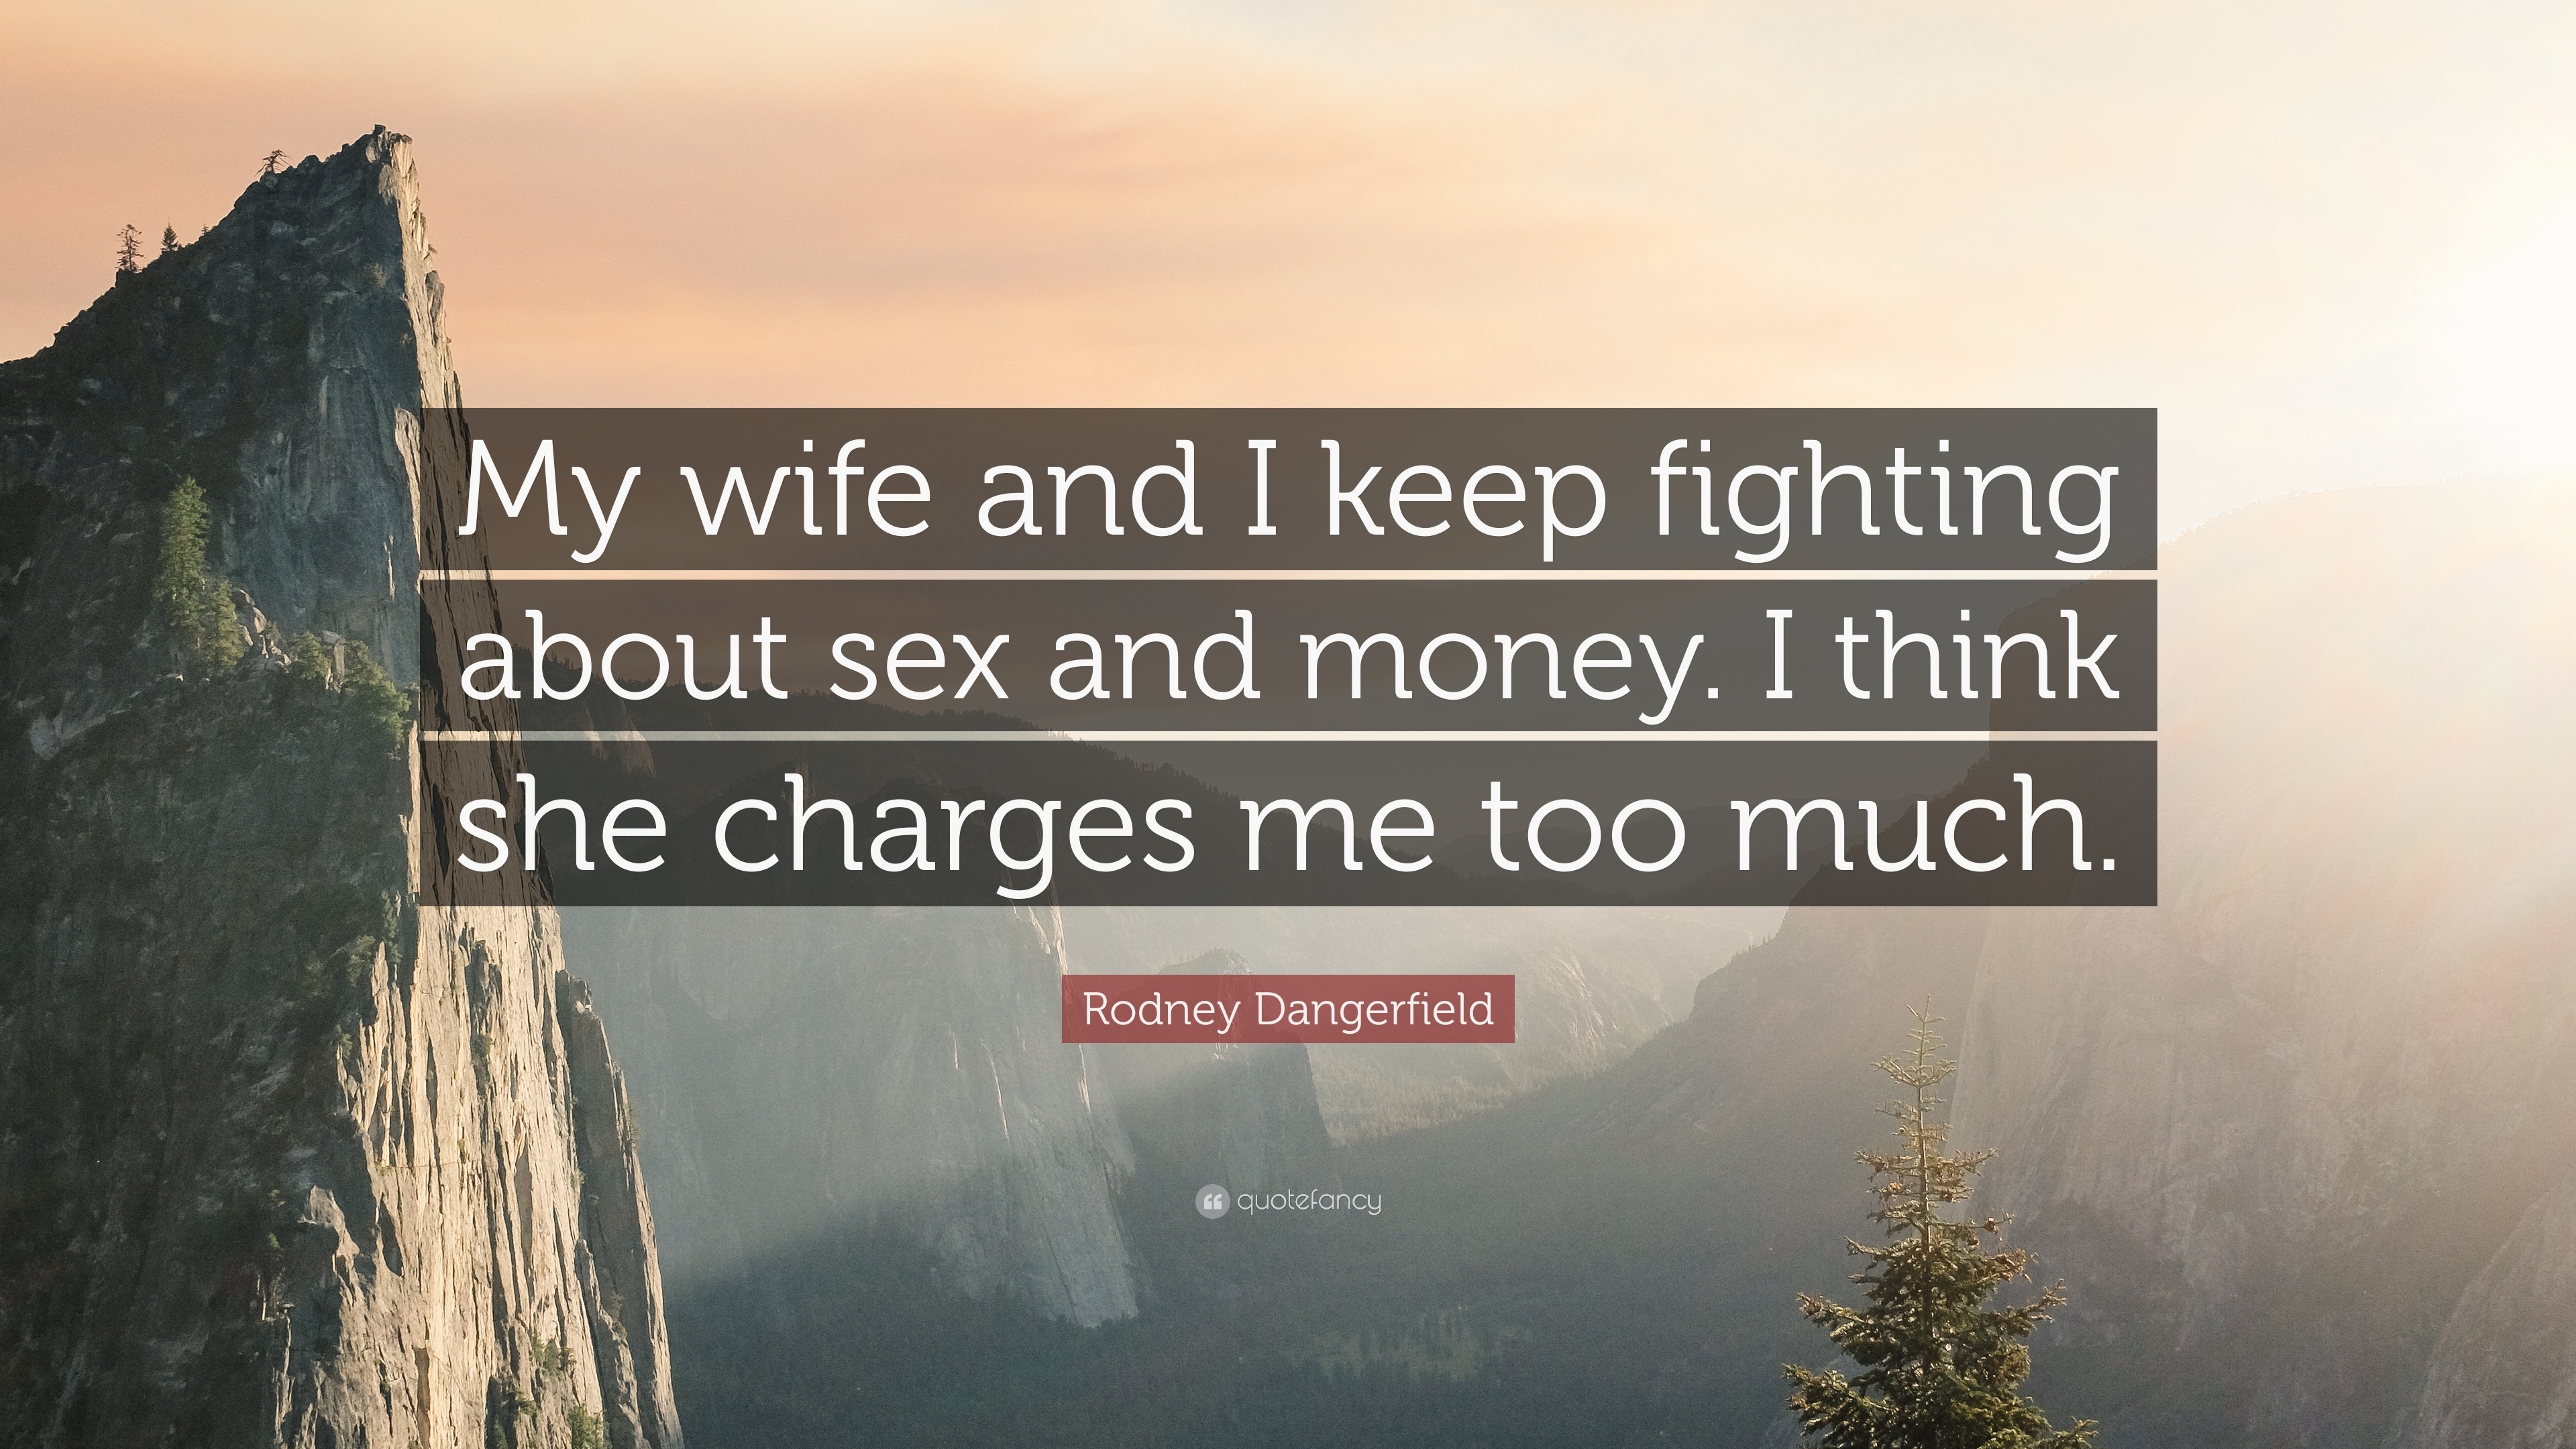 Rodney Dangerfield Quote “My wife and I keep fighting about sex and money photo picture